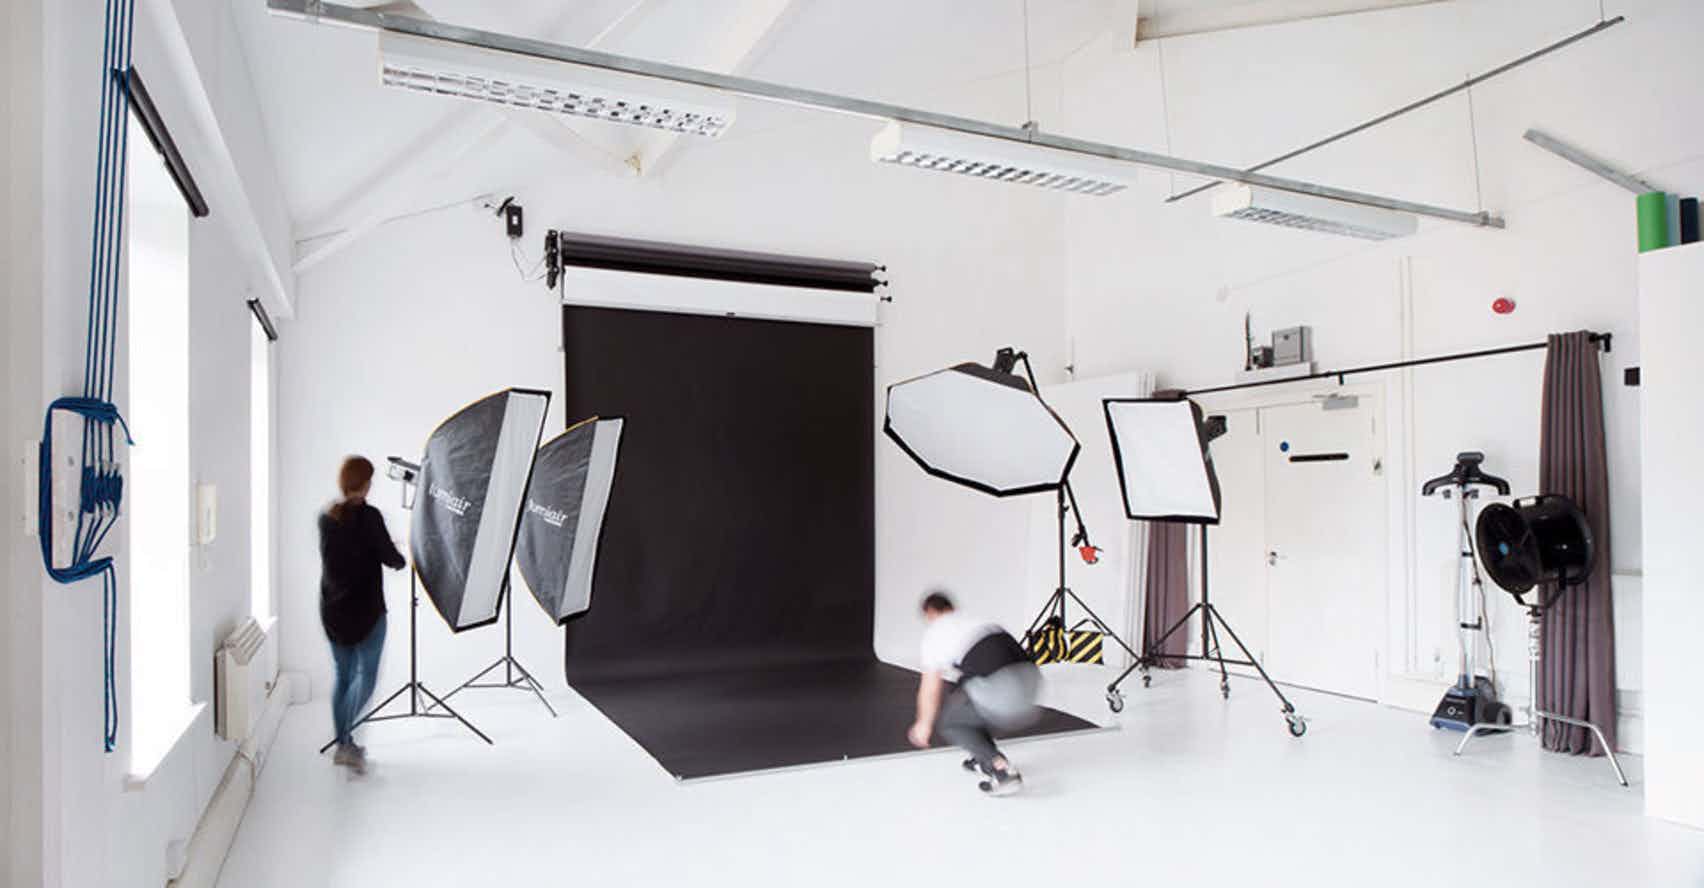 West London Studio - A photography studio to hire in West London from